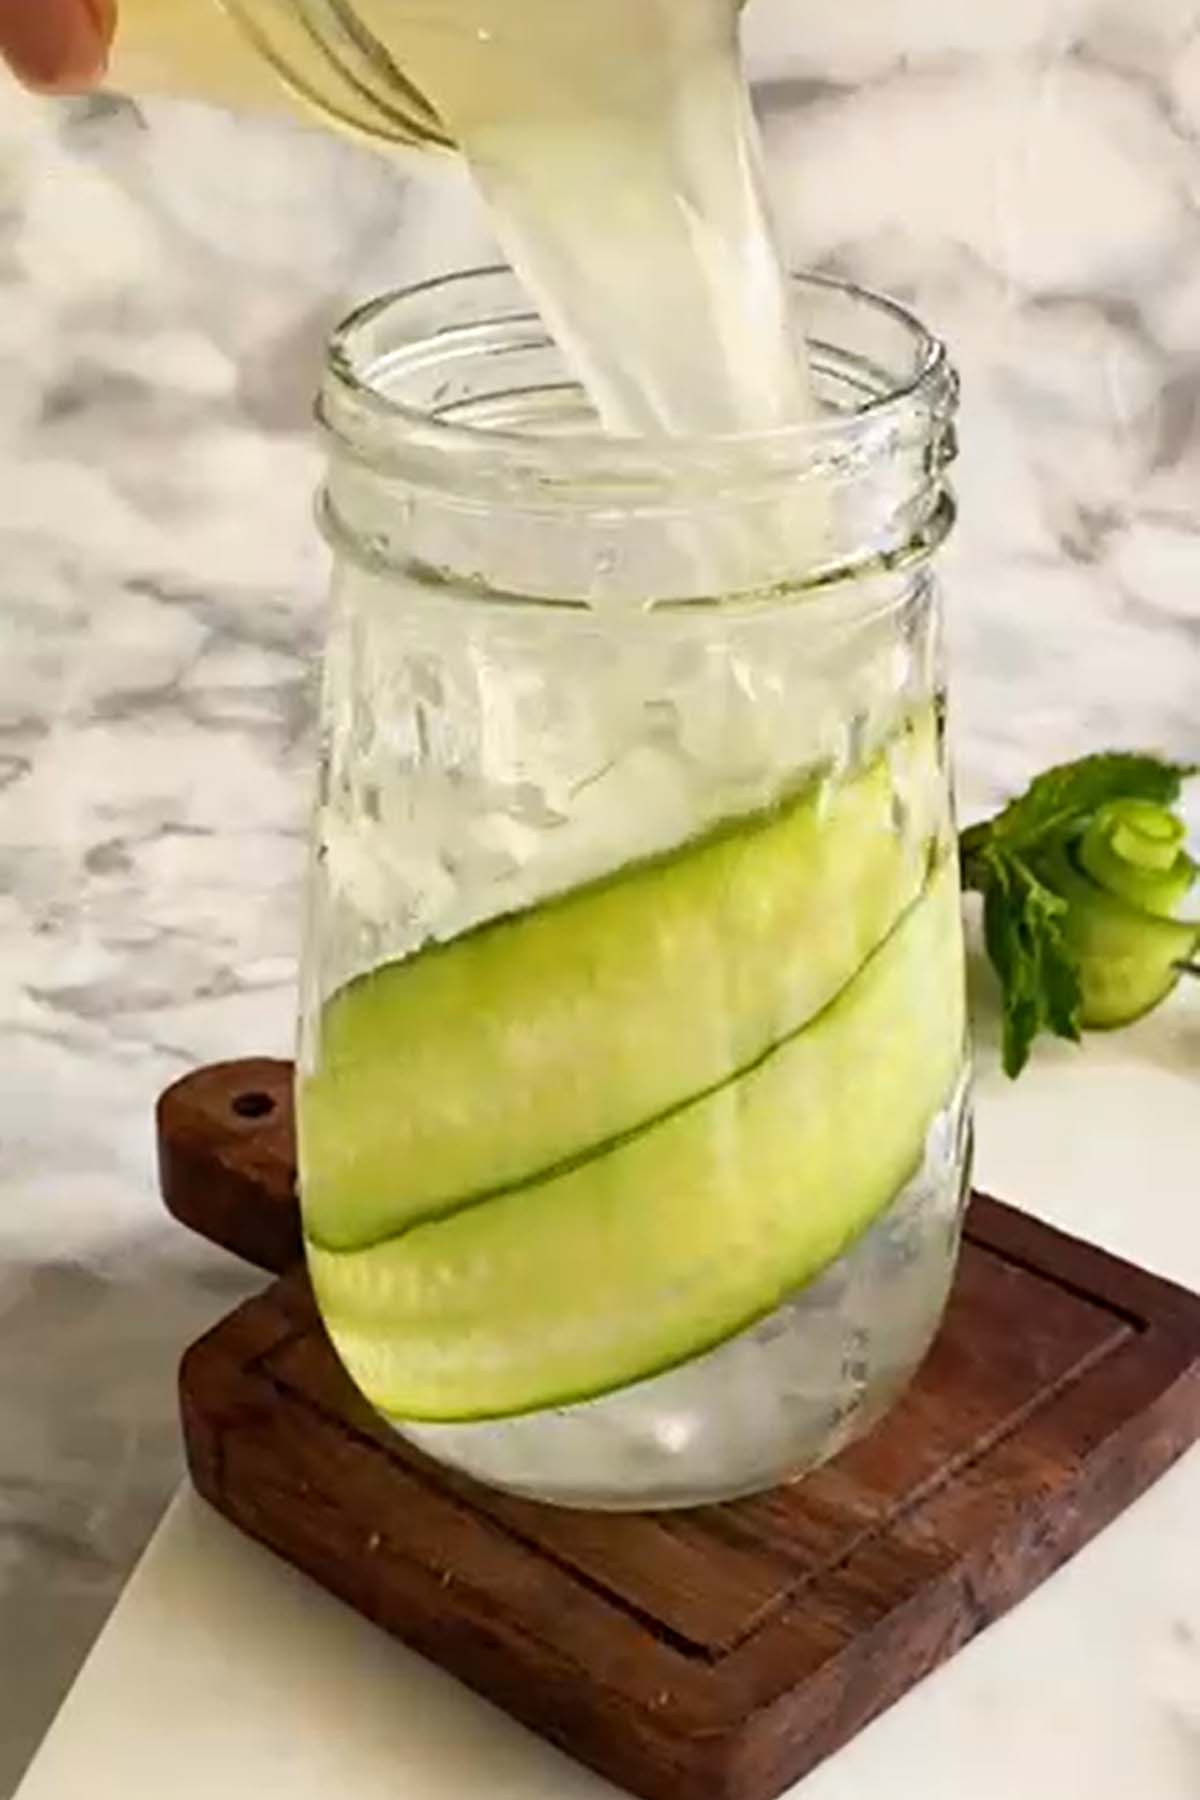 Lemonade is poured into a glass with cucumber ribbons along the side.